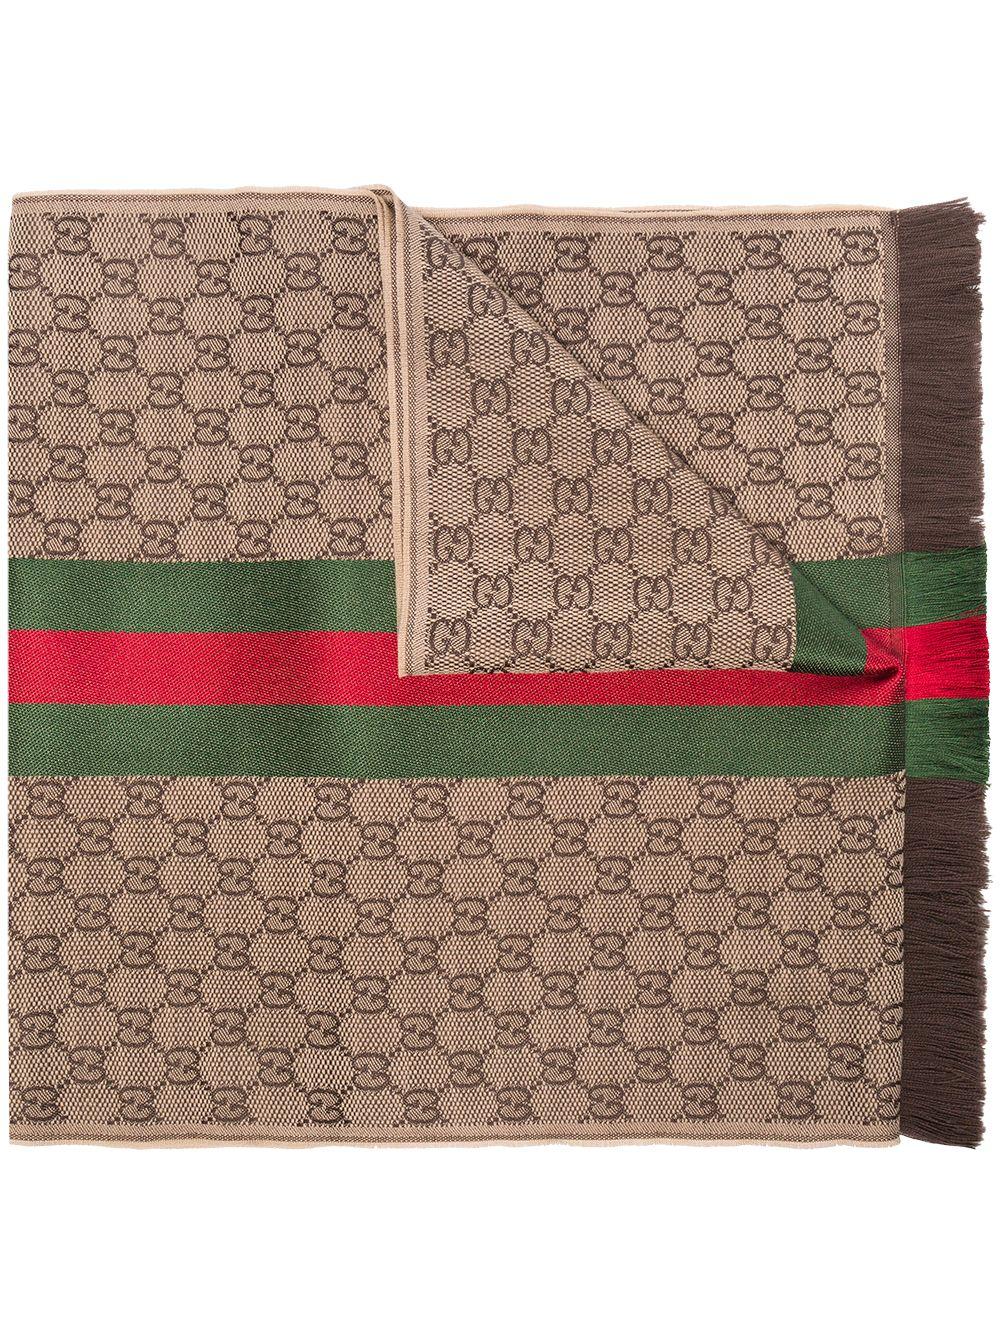 Gucci Web Snake Scarf for Men's 2016 Collection 